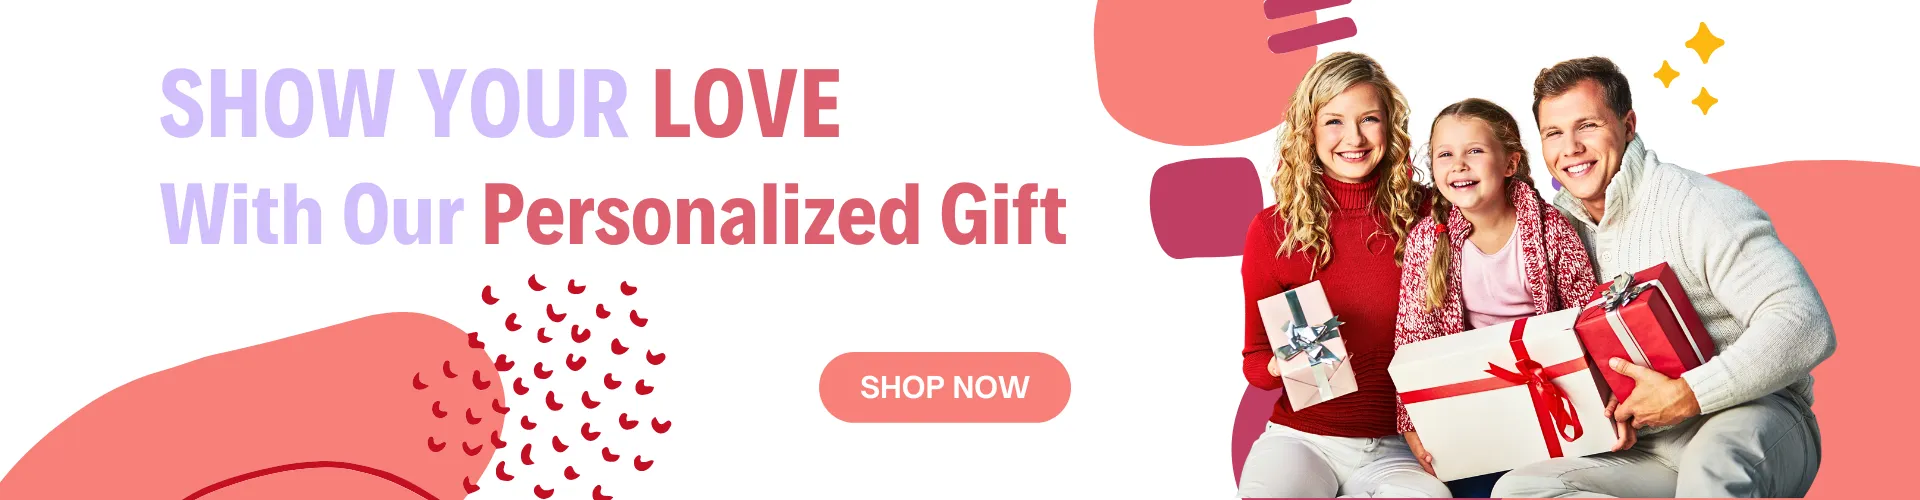 Show your love with personalized gift